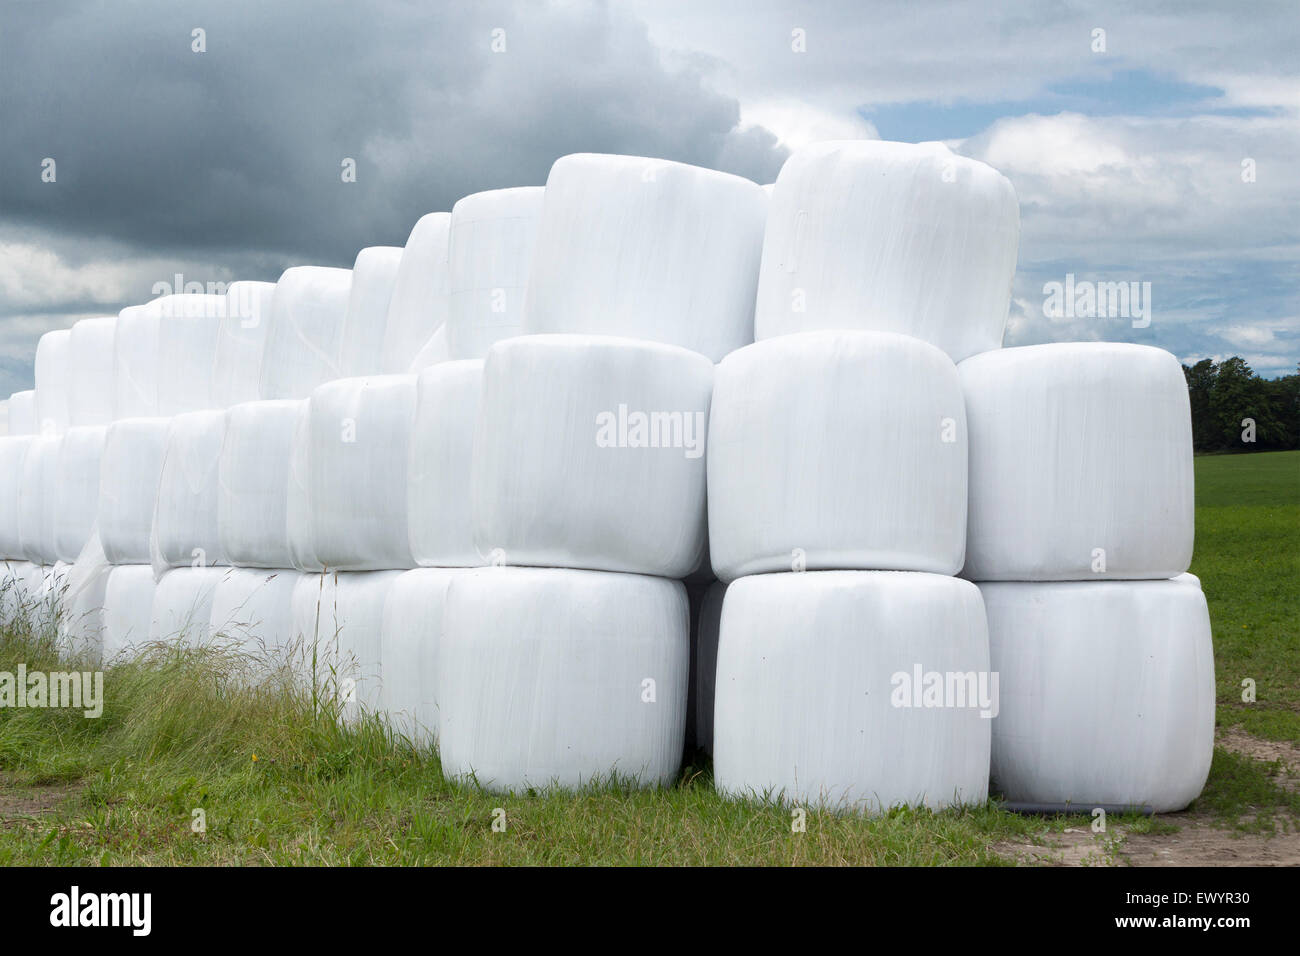 Stack of round hay bales wrapped in white plastic in a farm field on a stormy cloudy day Stock Photo